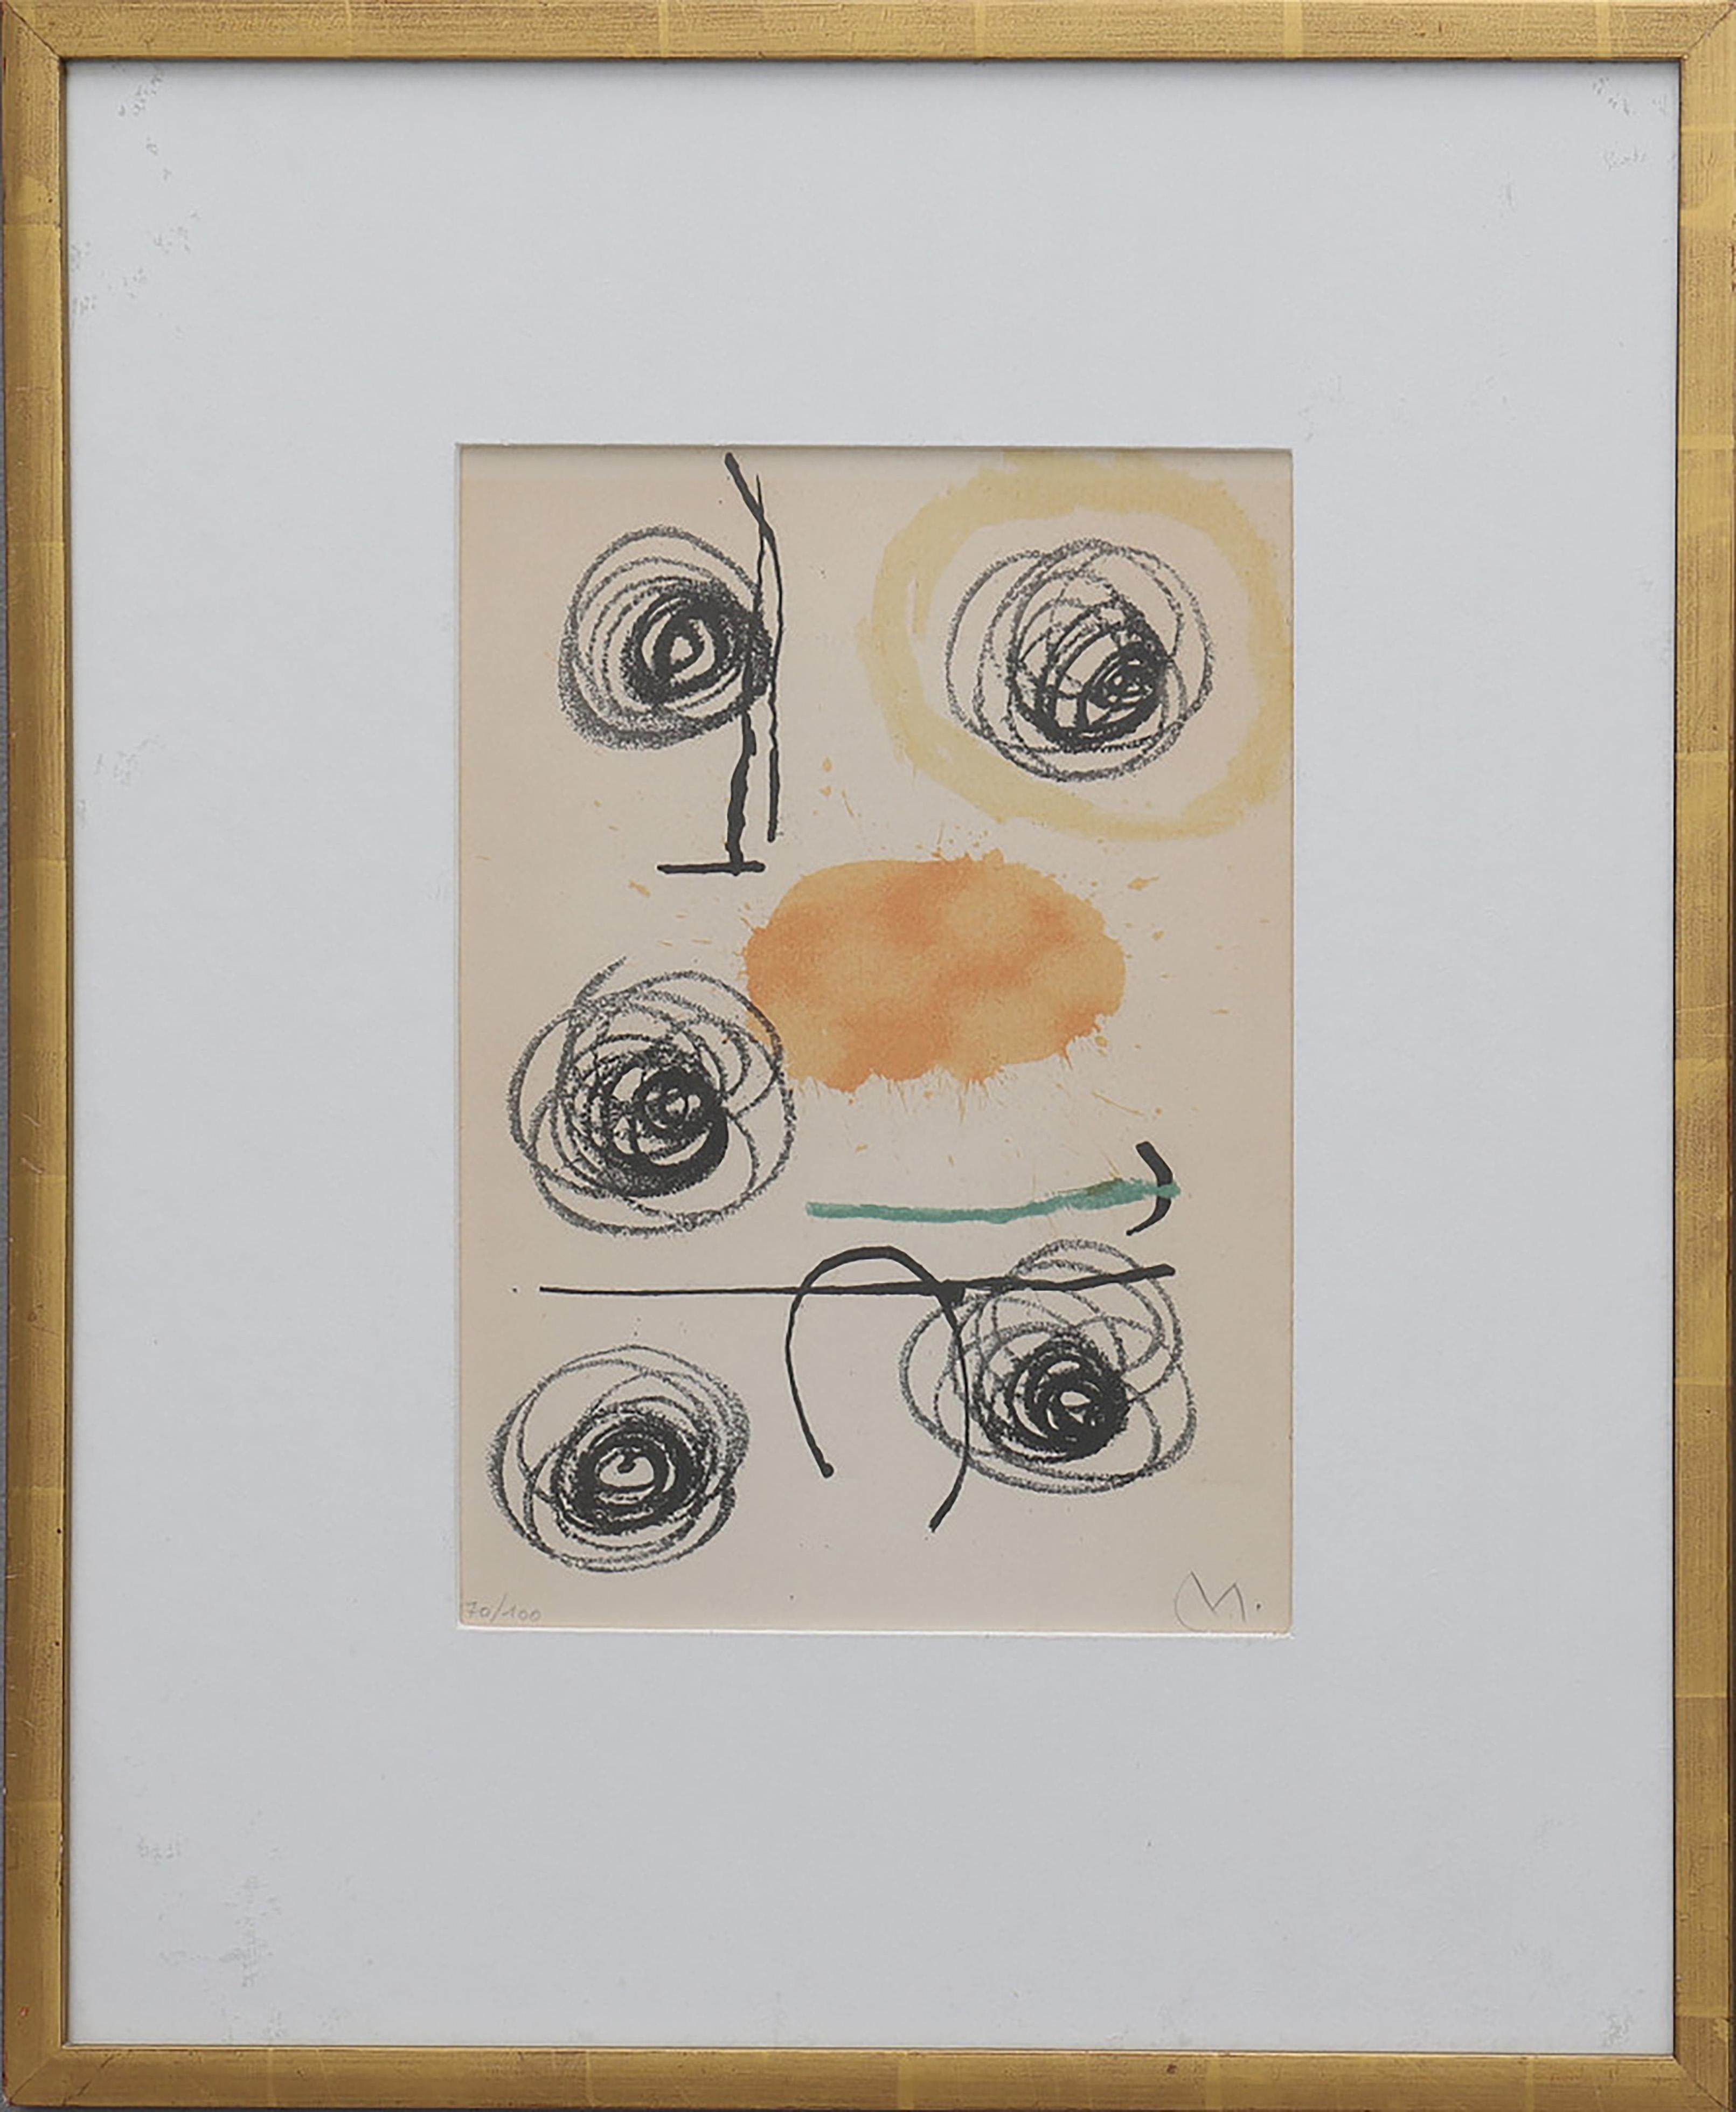 Signed, color lithograph, No. IV, 1964, paper back with printed text, 
sheet size 30.5x22 cm, printed by Sala Gaspar, Barcelona in 1964.
This original lithograph in colours is hand signed at the lower right corner in pencil by the artist with his